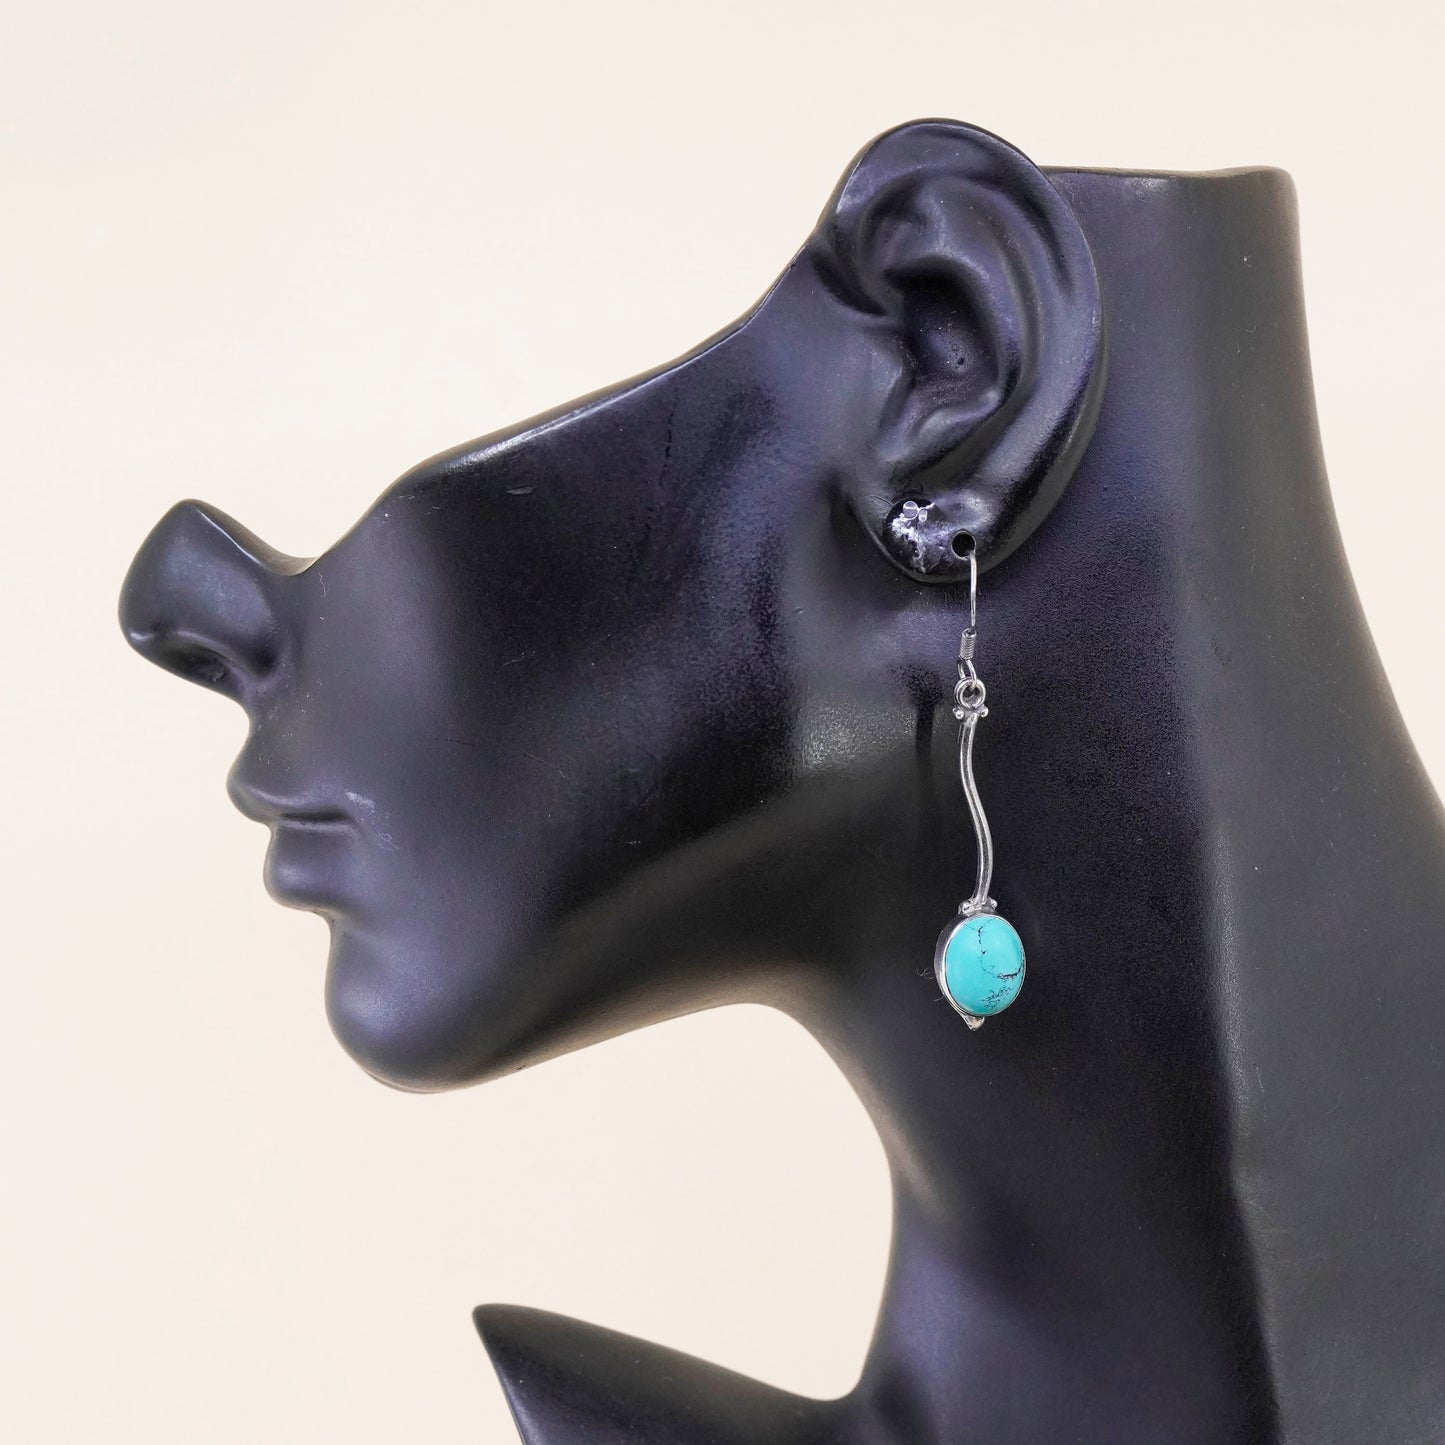 Vintage Sterling silver handmade earrings, 925 wavy drops with turquoise